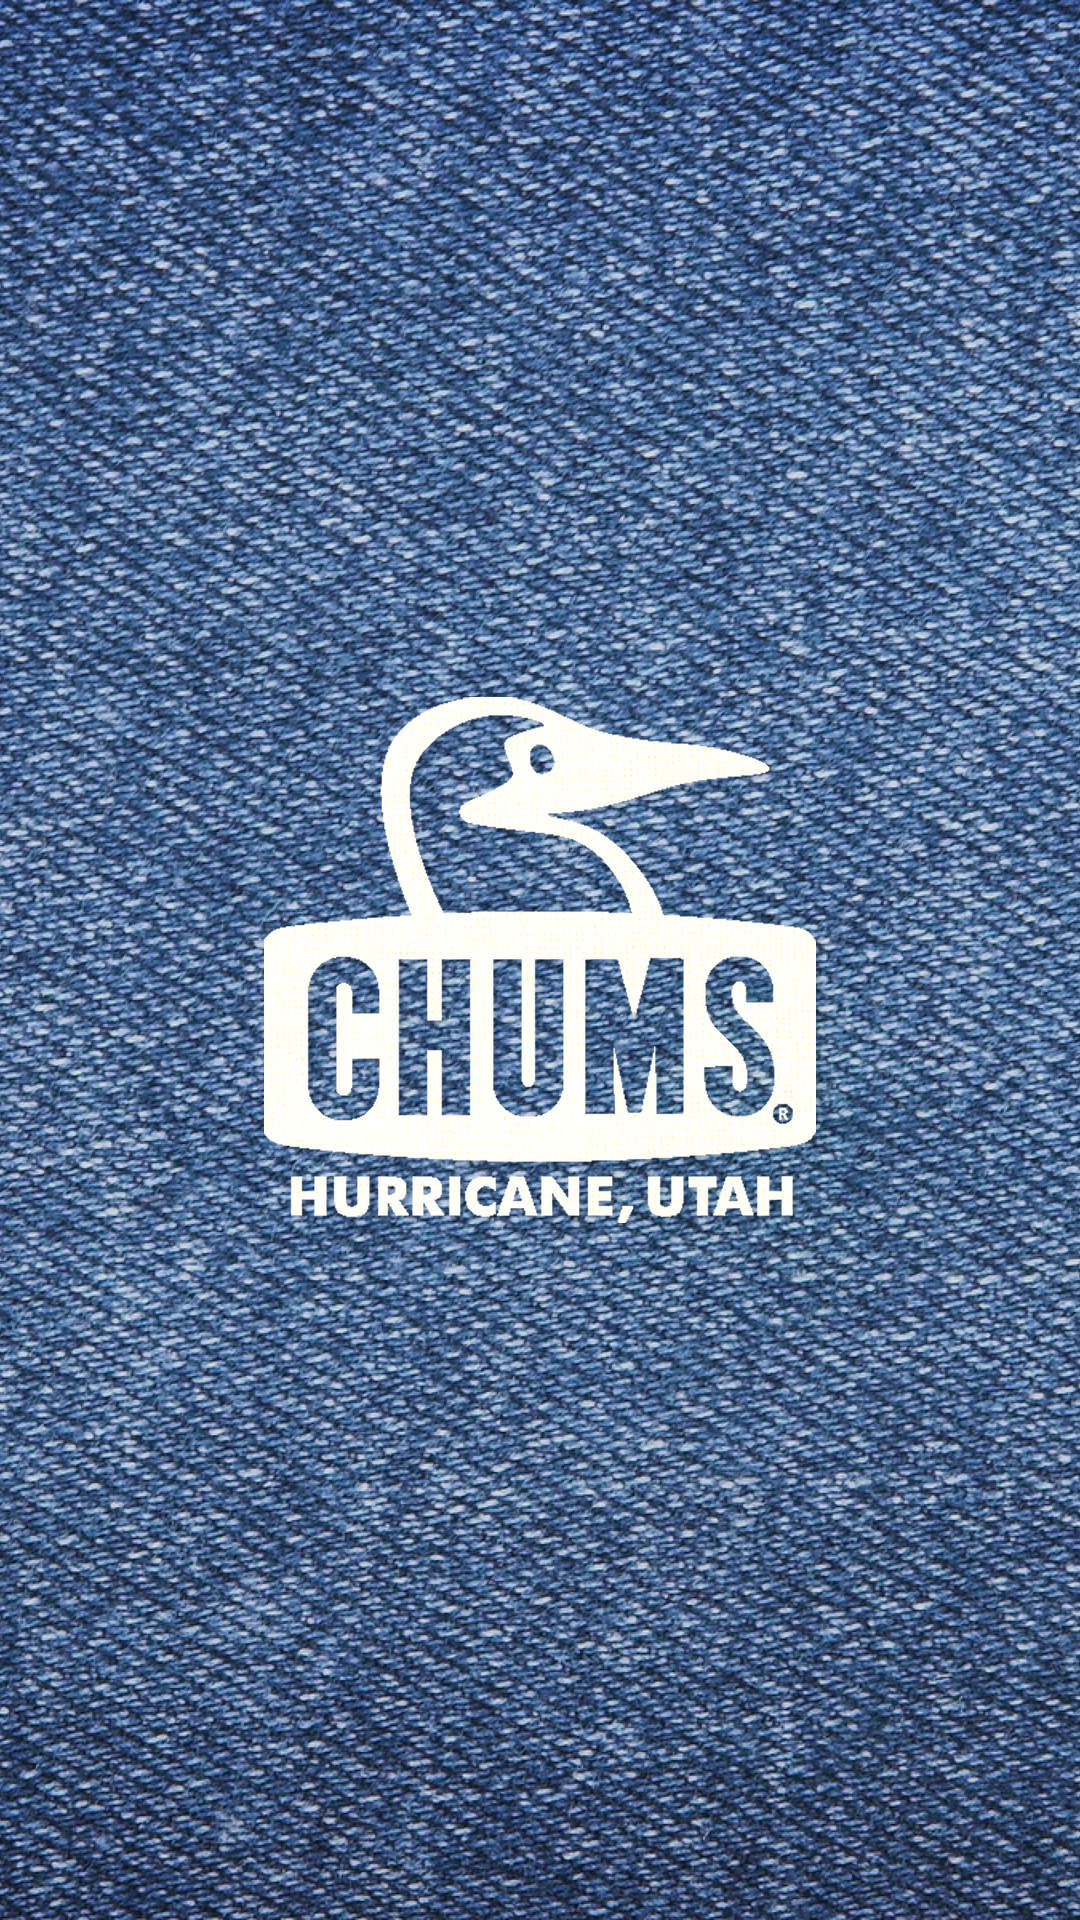 Chums チャムス デニムのiphone壁紙 Iphone Wallpapers